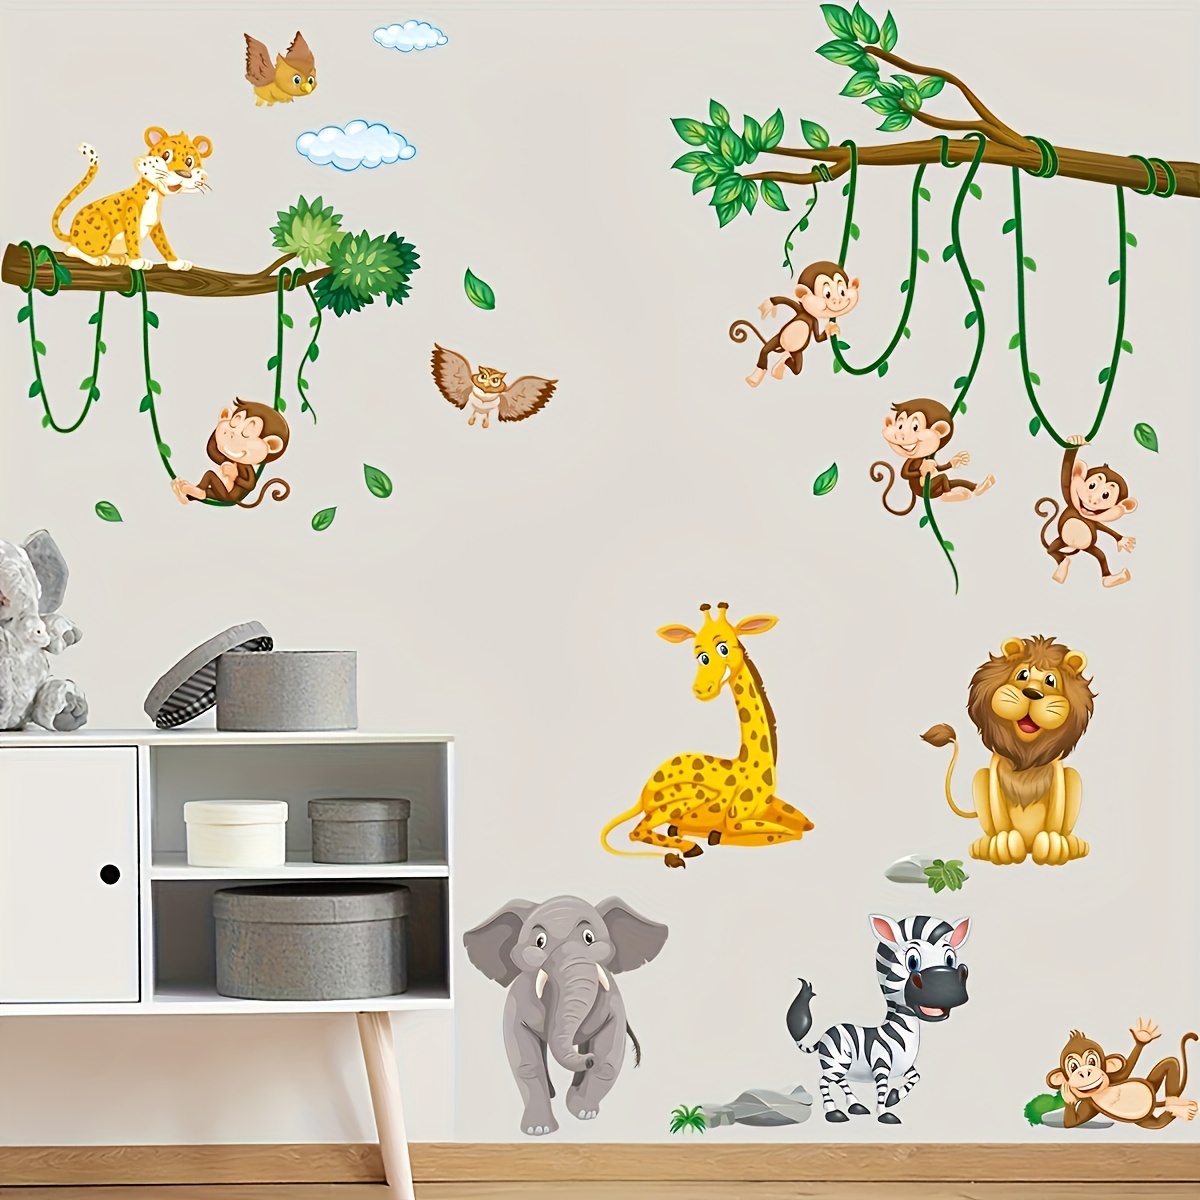 

2-piece Adorable Cartoon Animal Wall Decals - Removable Pvc Stickers With Owl, Monkey, Lion, Zebra & Elephant Designs For Kids' Rooms, Nurseries & Classrooms